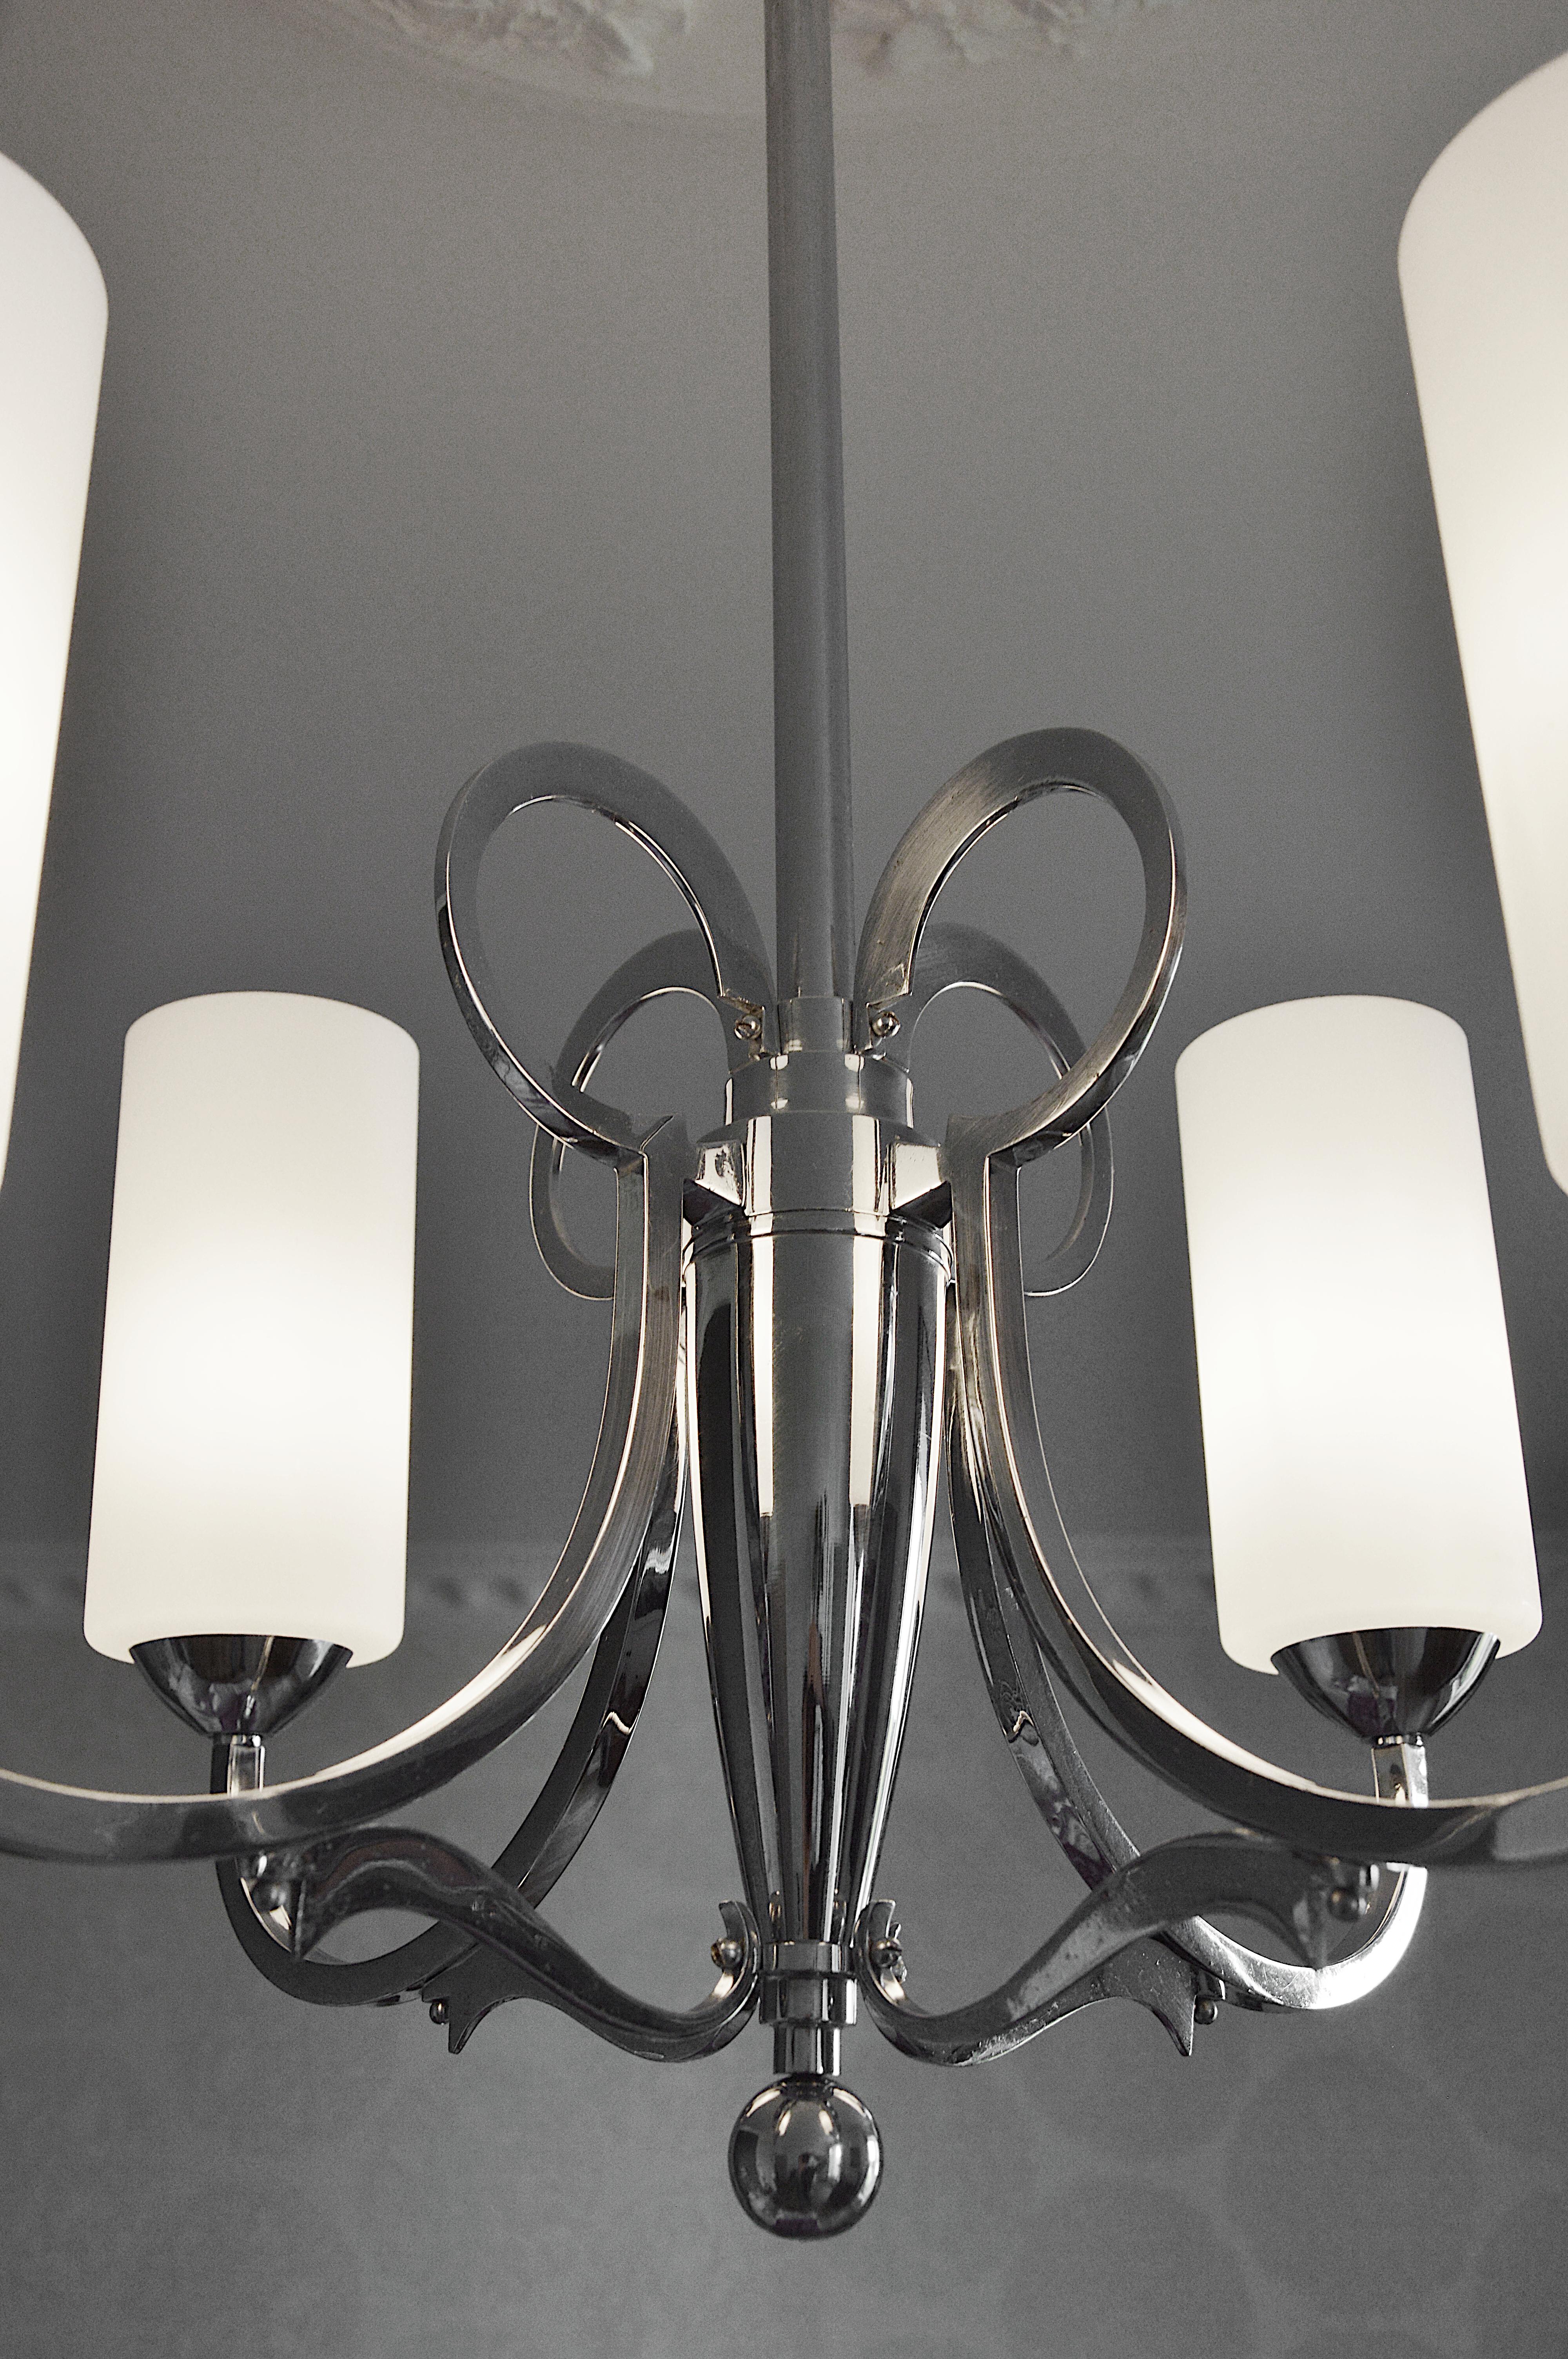 Mid-20th Century French Art Deco Modernist Chrome Chandelier, 1930s For Sale